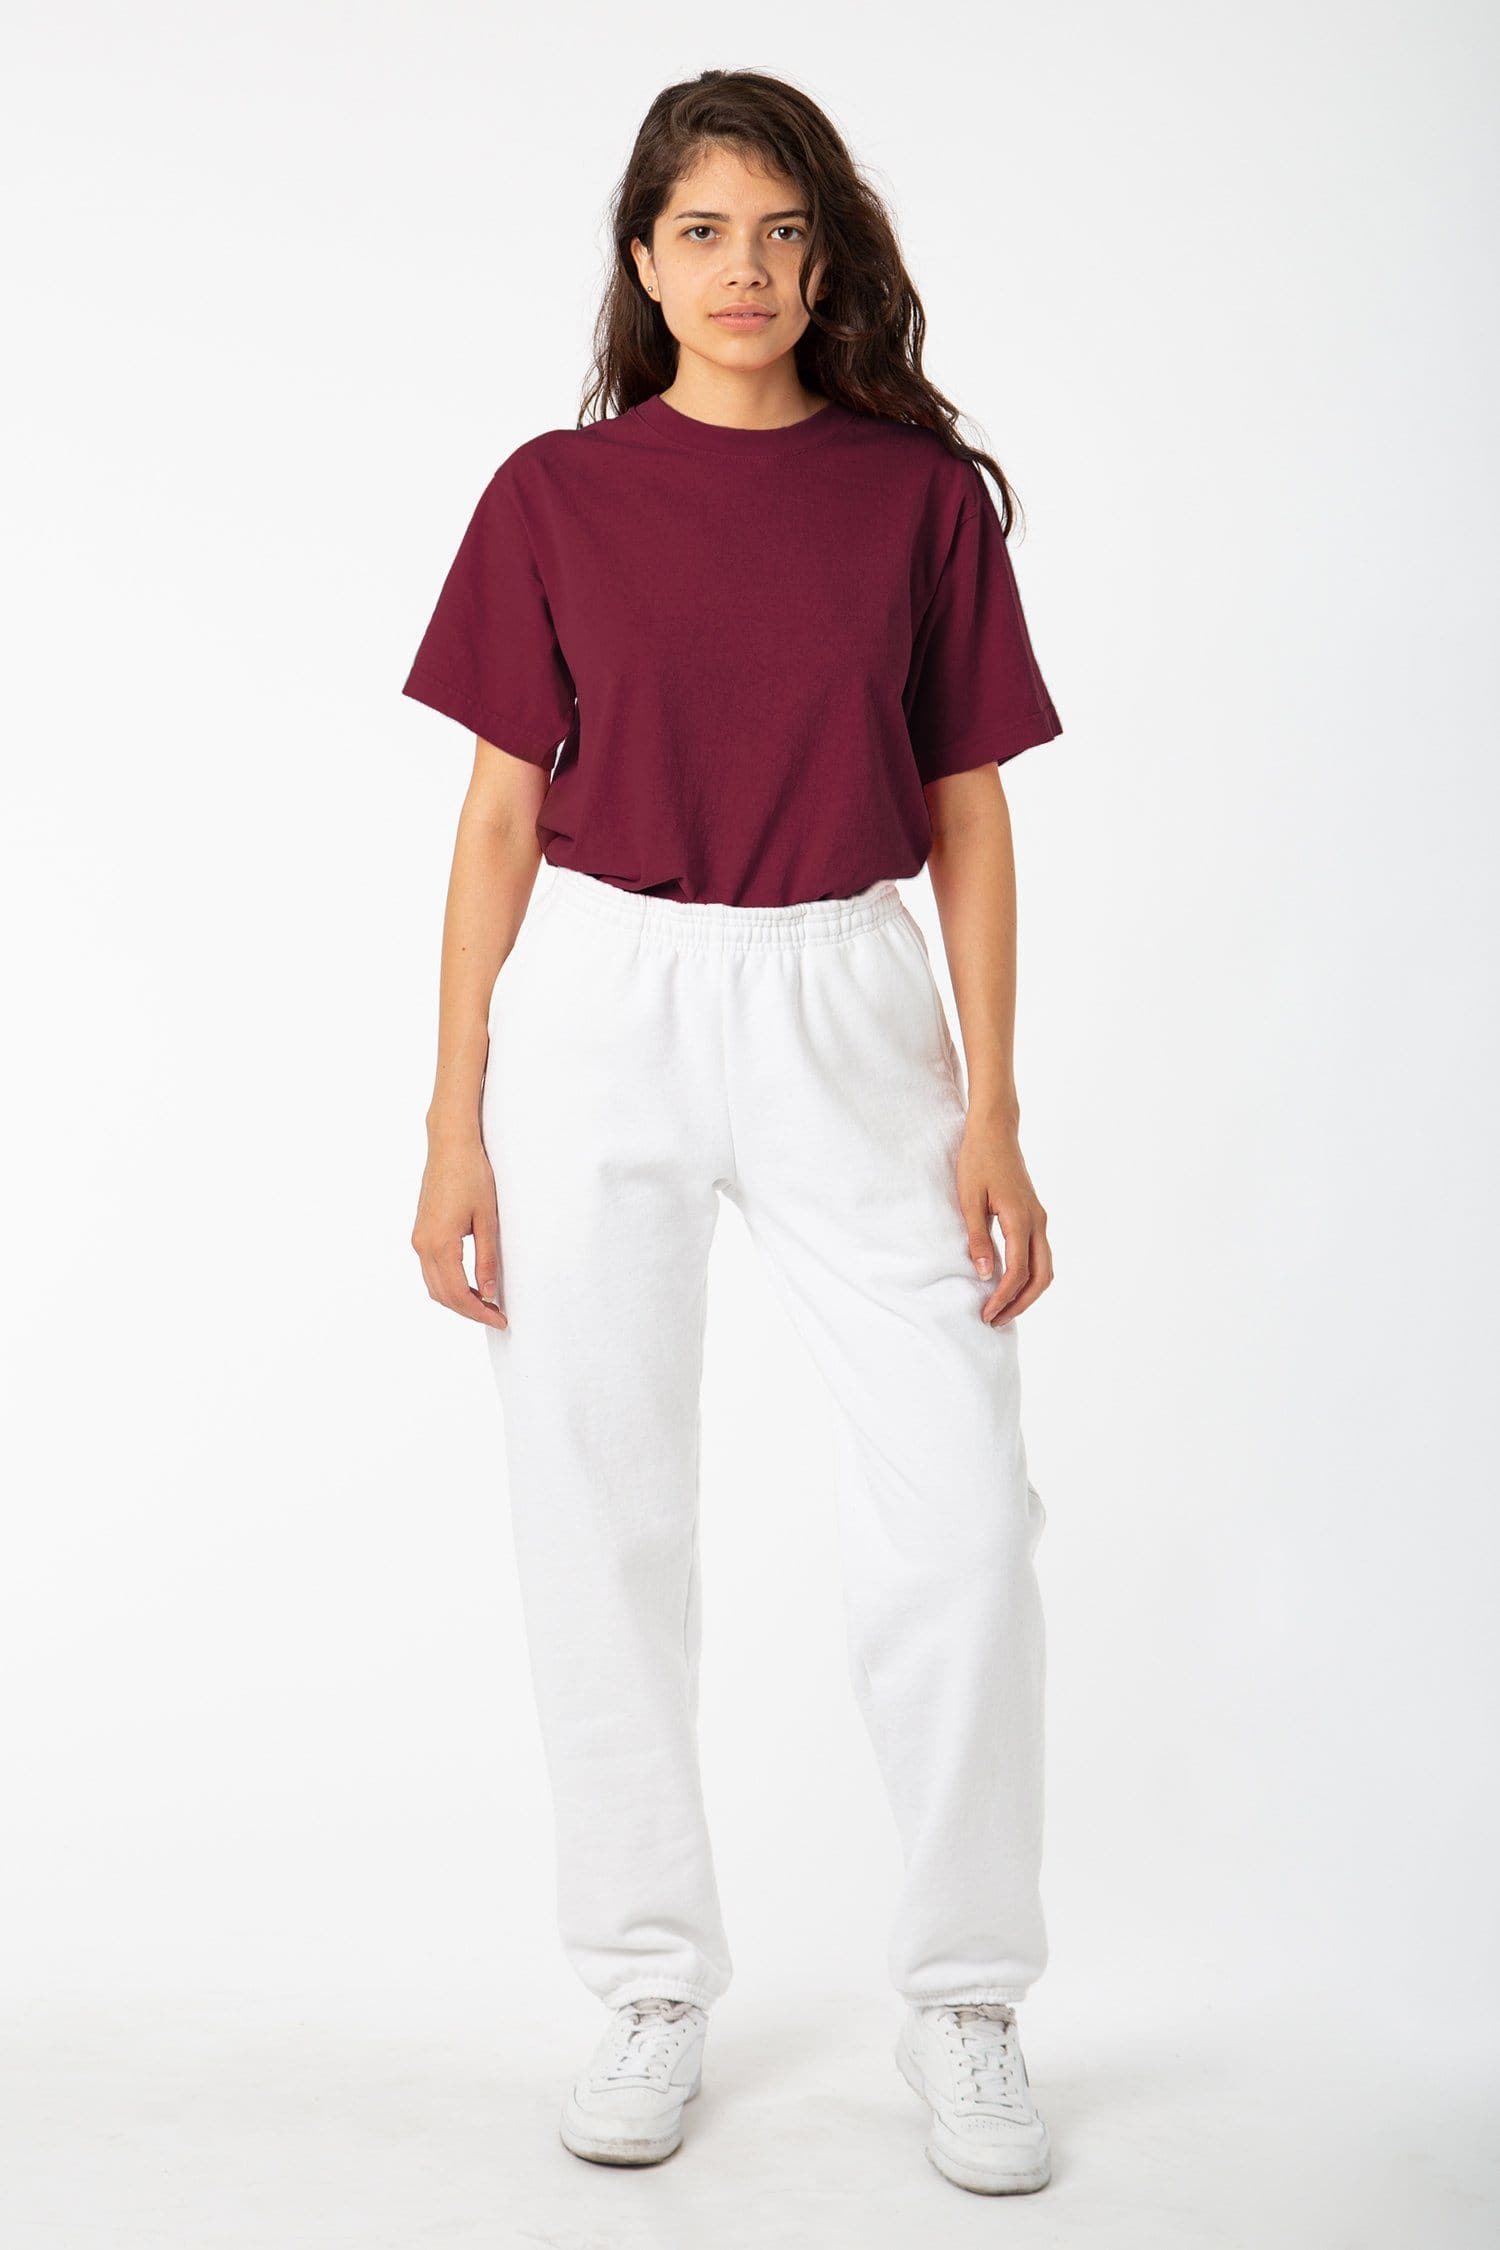 Los Angeles Apparel on Instagram The Relaxed Pant Thats Los Angeles  Kona is shown here in the 8396 Spaghetti   Crop tops Black and white  blouse Relax pants